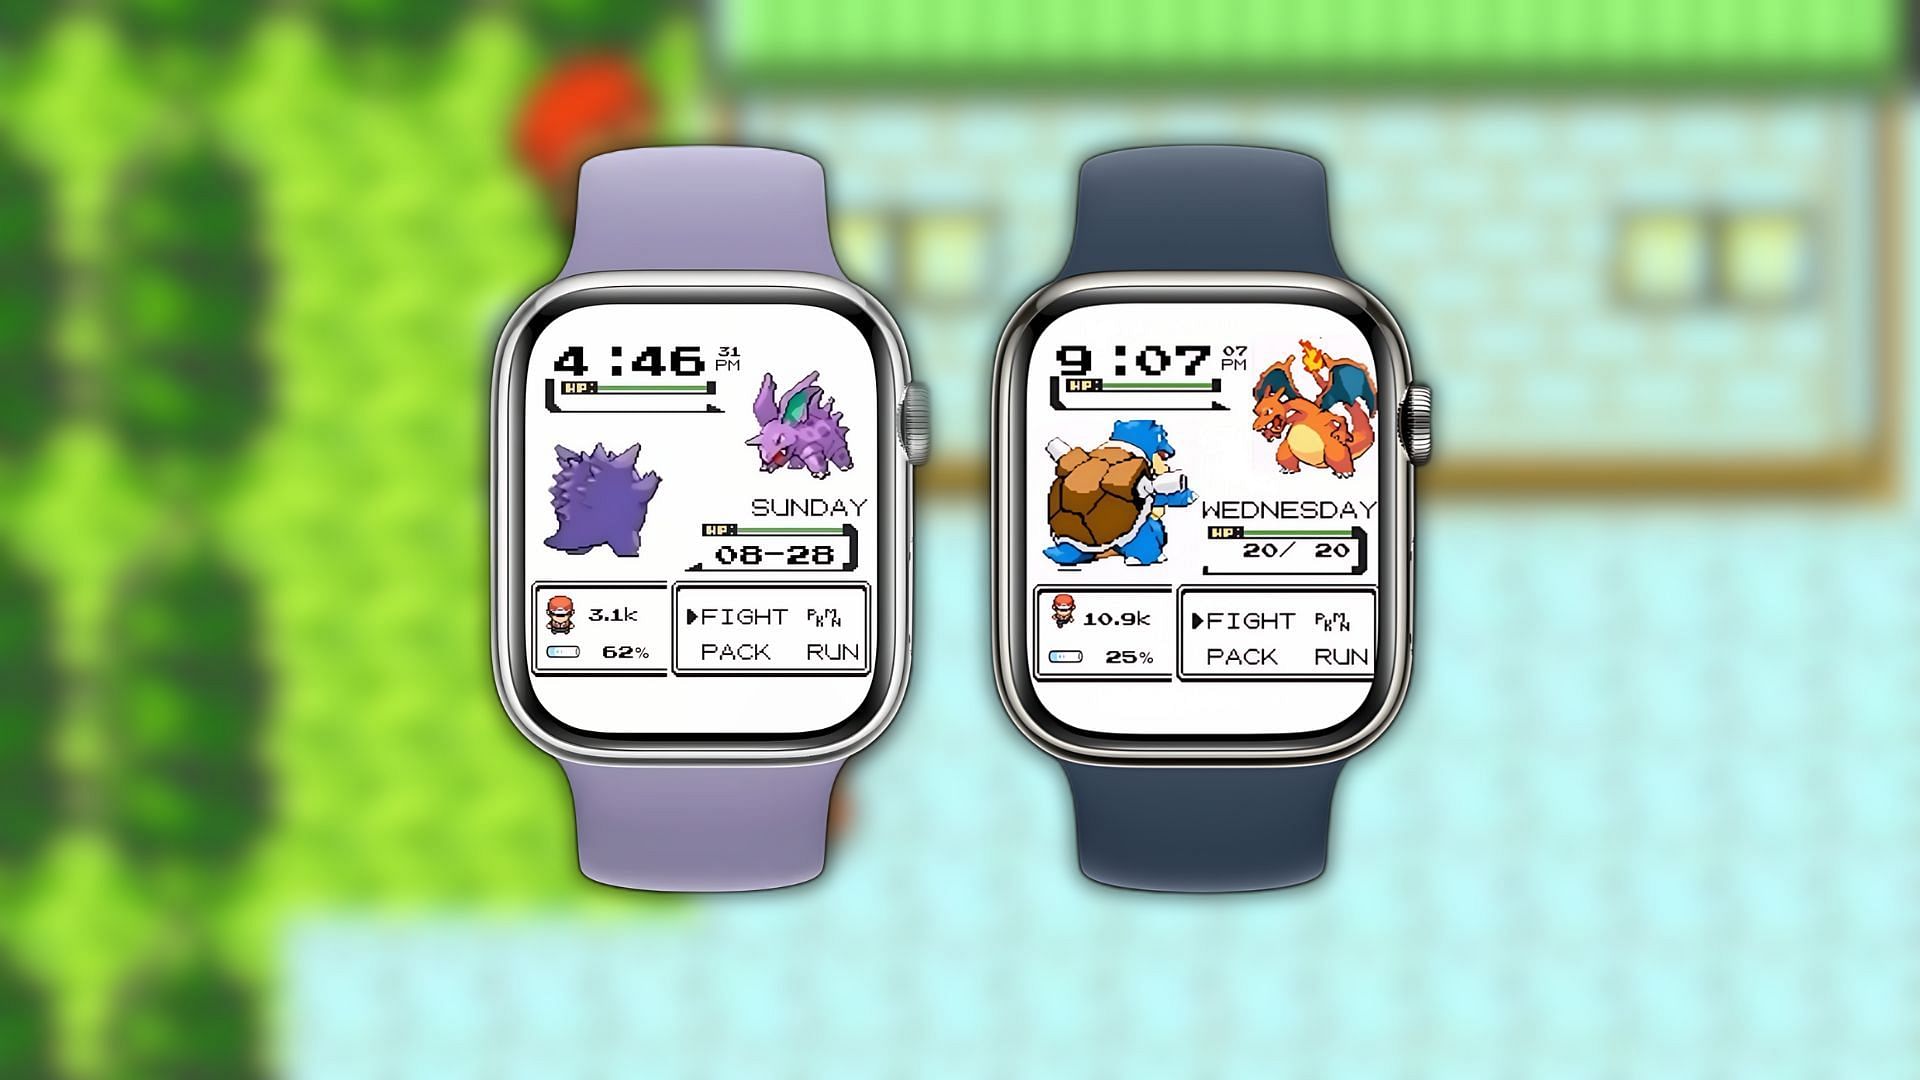 How to get Pokemon custom face on Apple Watch?